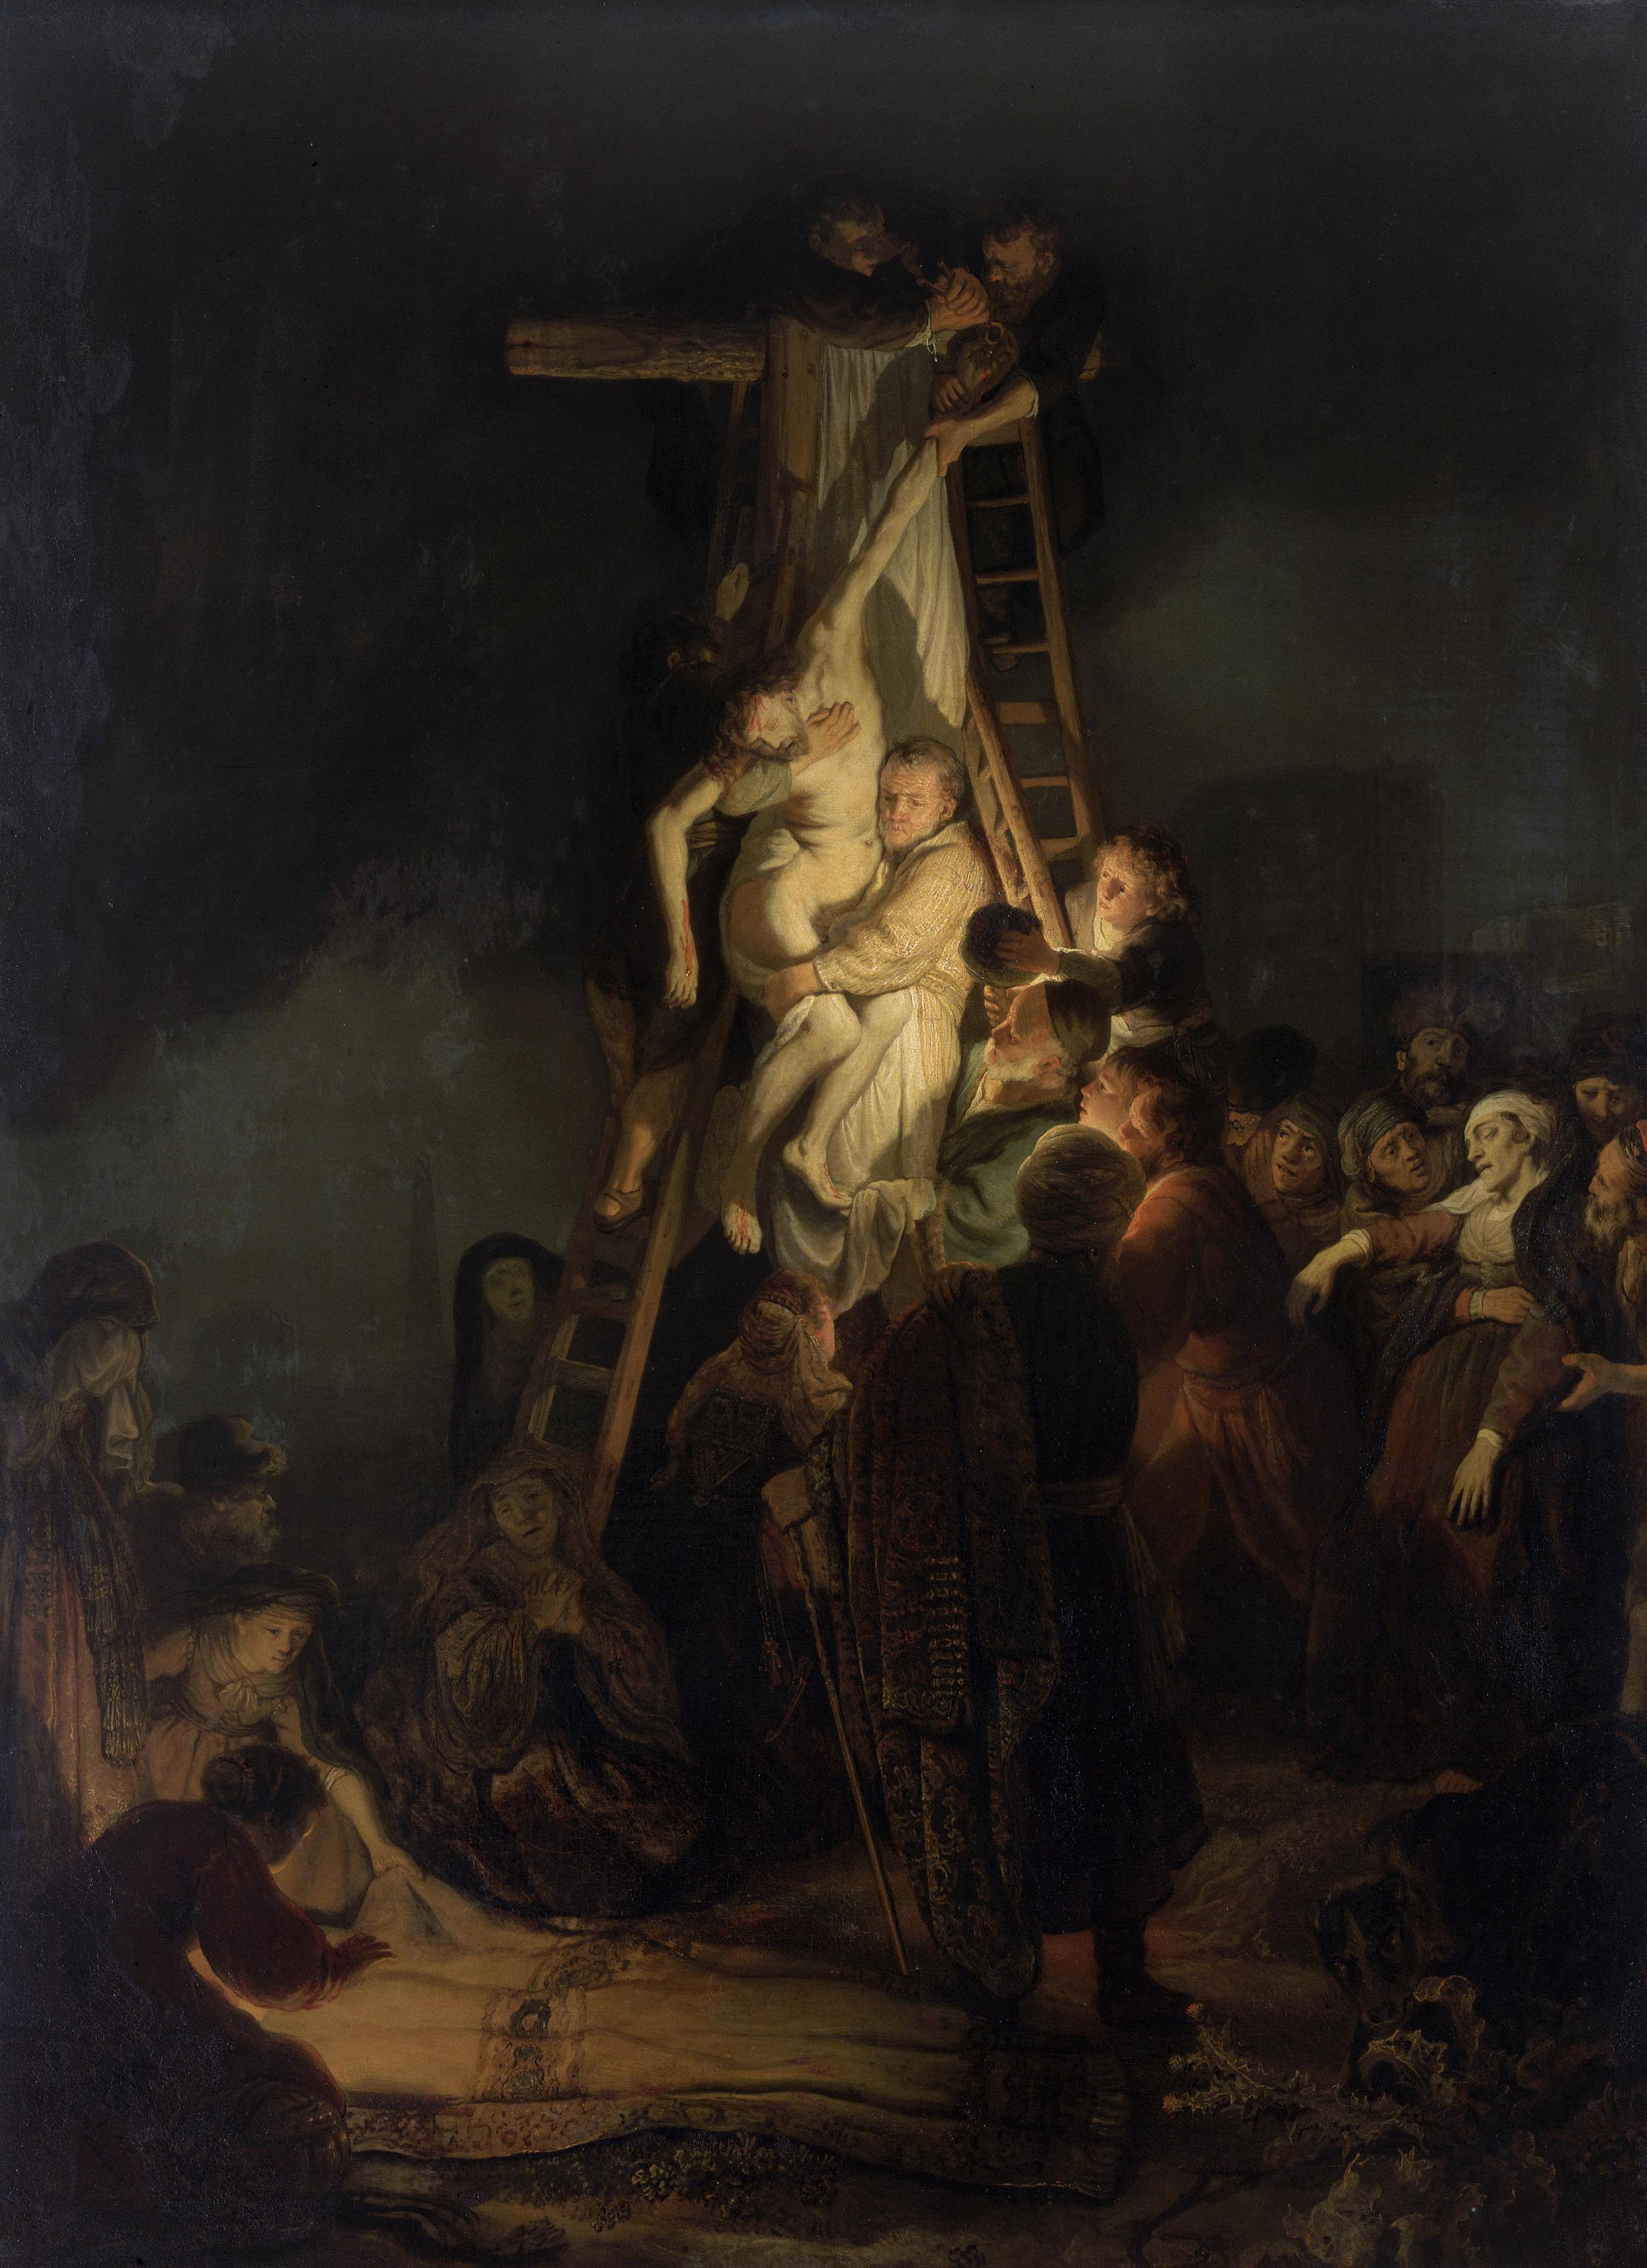 Painting religion in Rembrandt's time